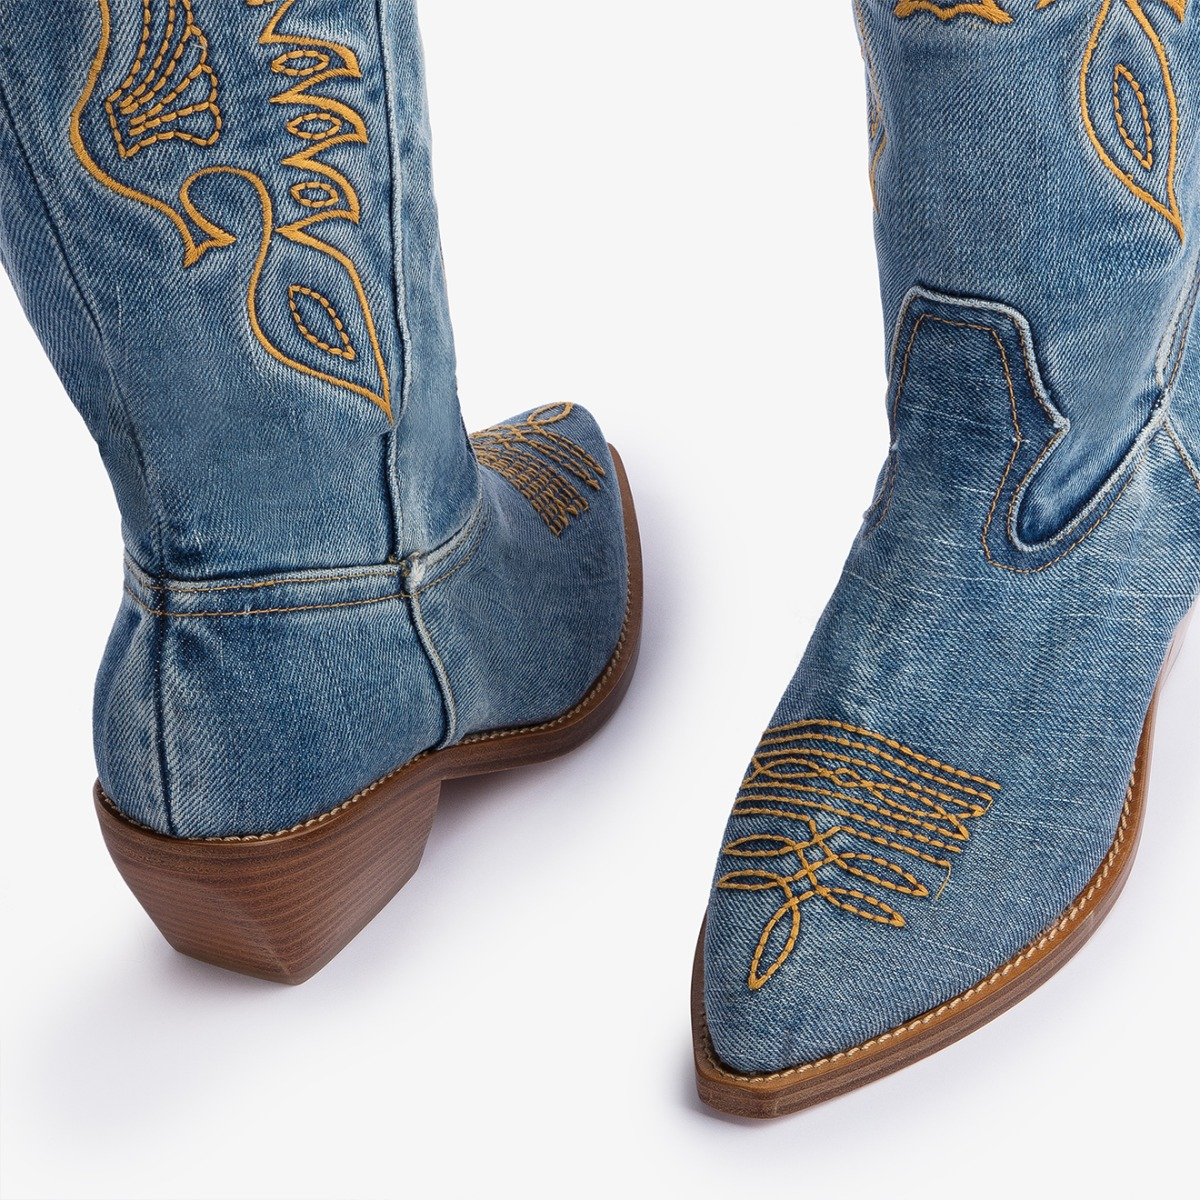 CHRISTINE COWBOY BOOT 60 mm - Le Silla official outlet